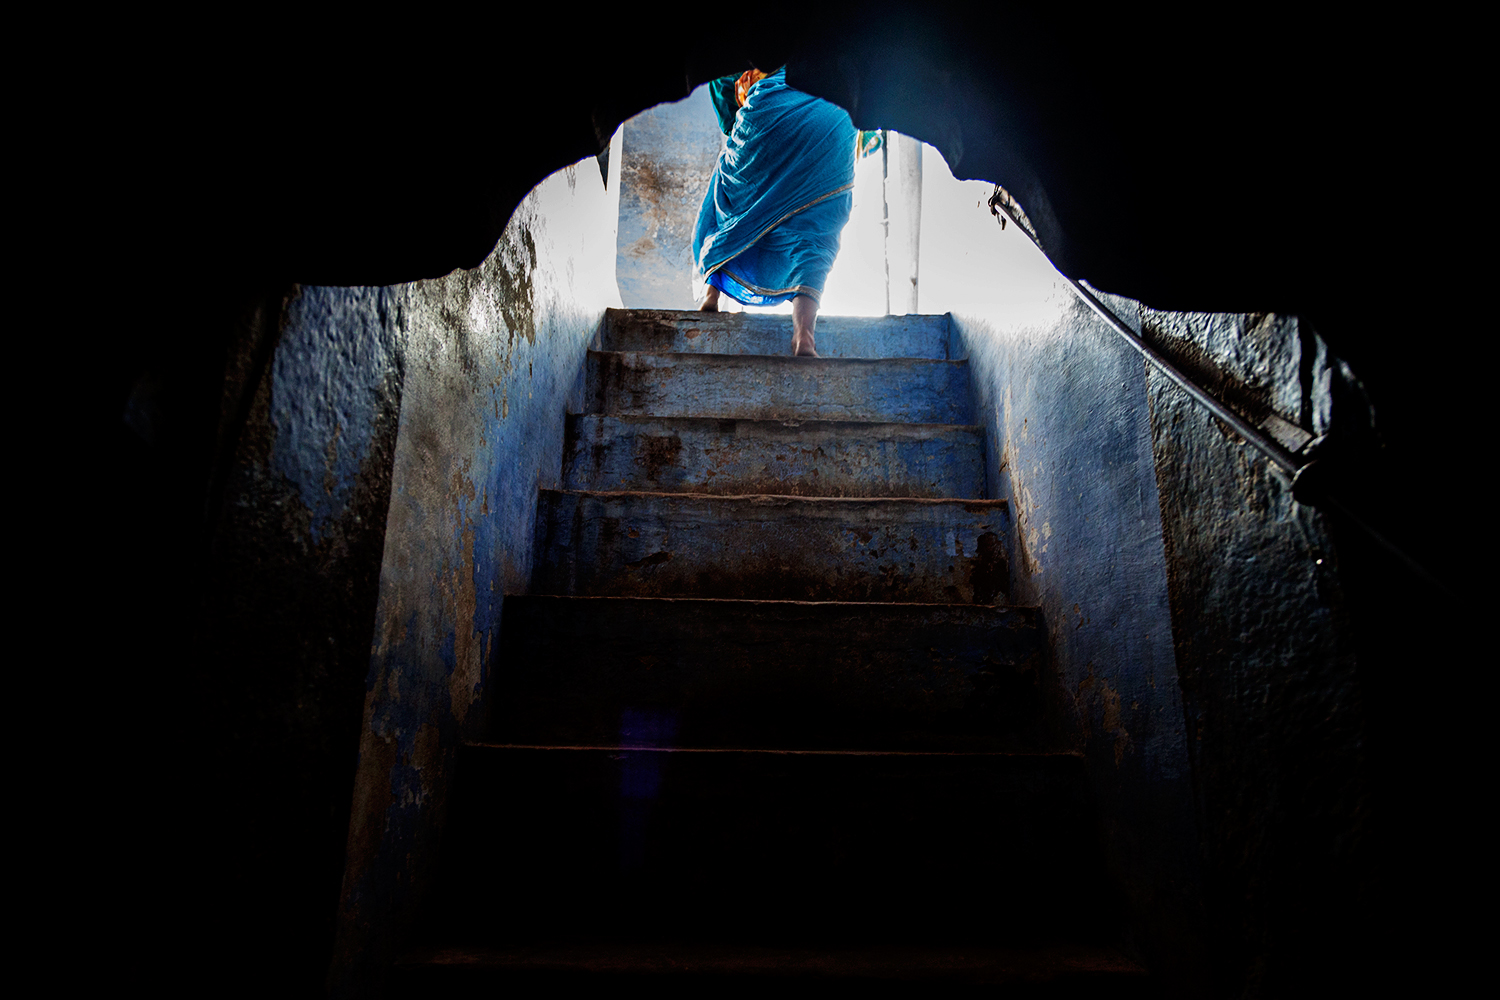  A woman walks upstairs to a communal area from her sleeping quarter in the ashram.   &nbsp;  